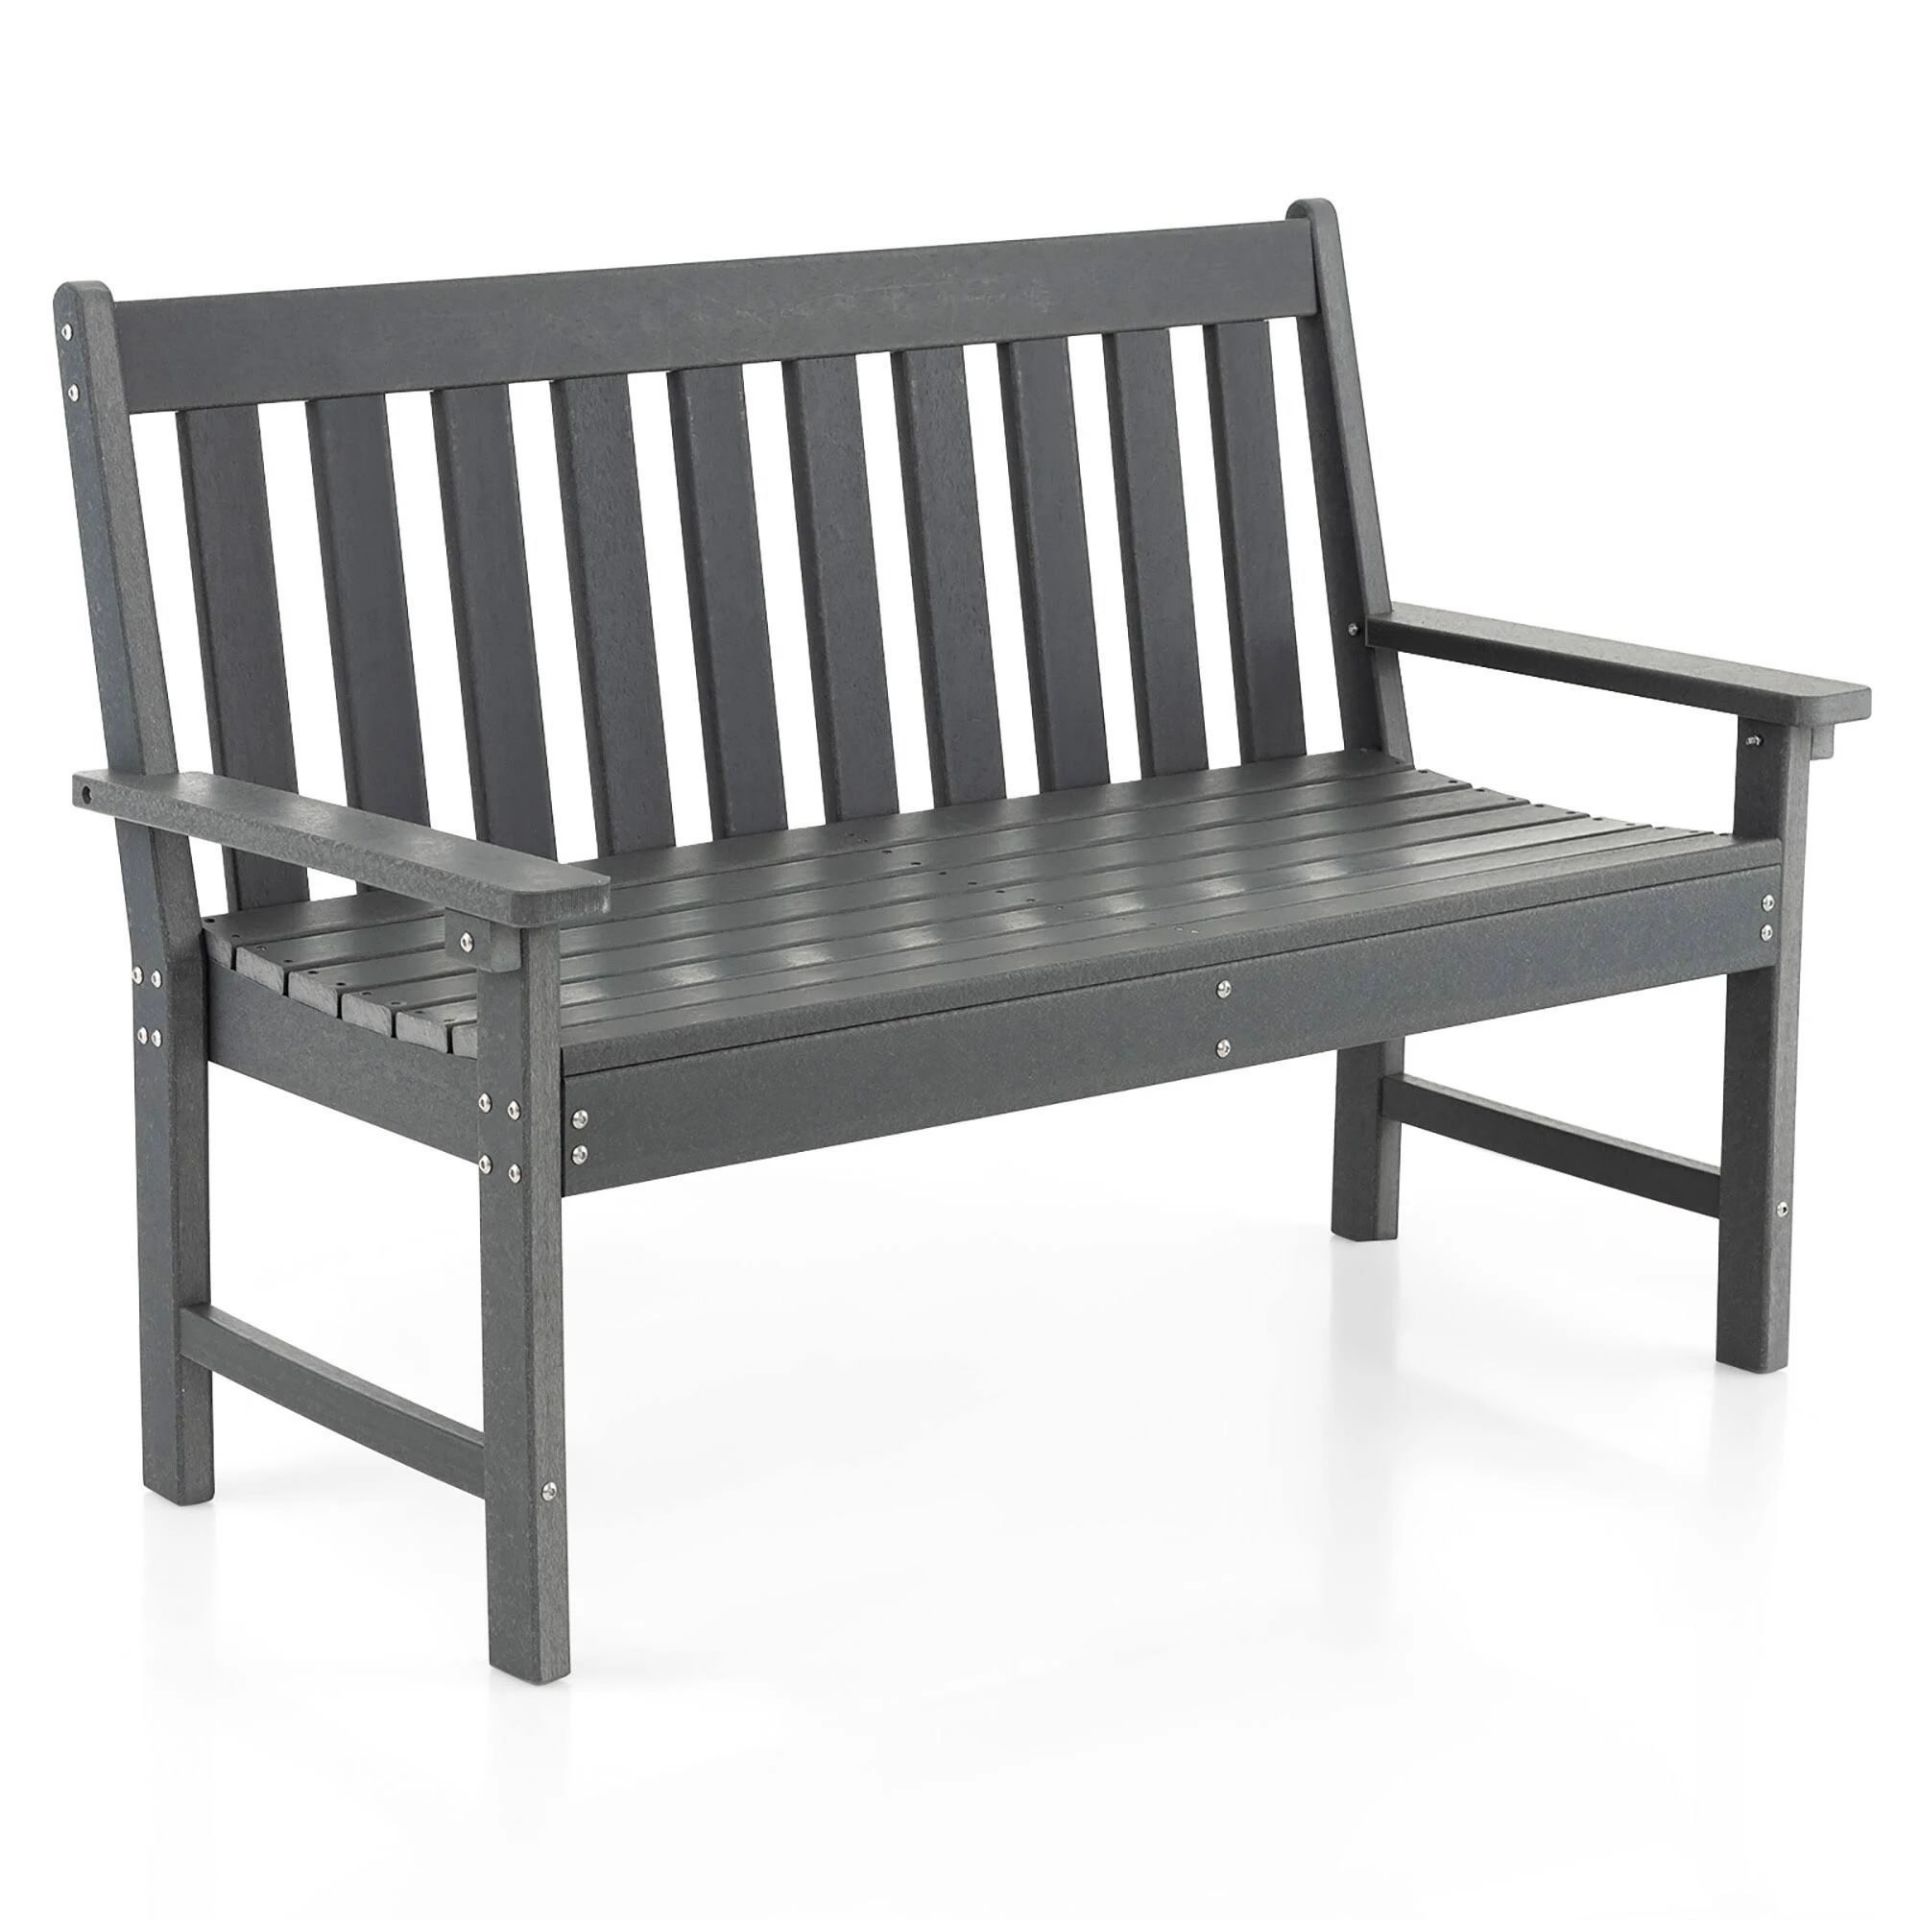 Costway Outdoor All-Weather HDPE Bench Patio 2-Person Armrests and Backrest. - ER53.